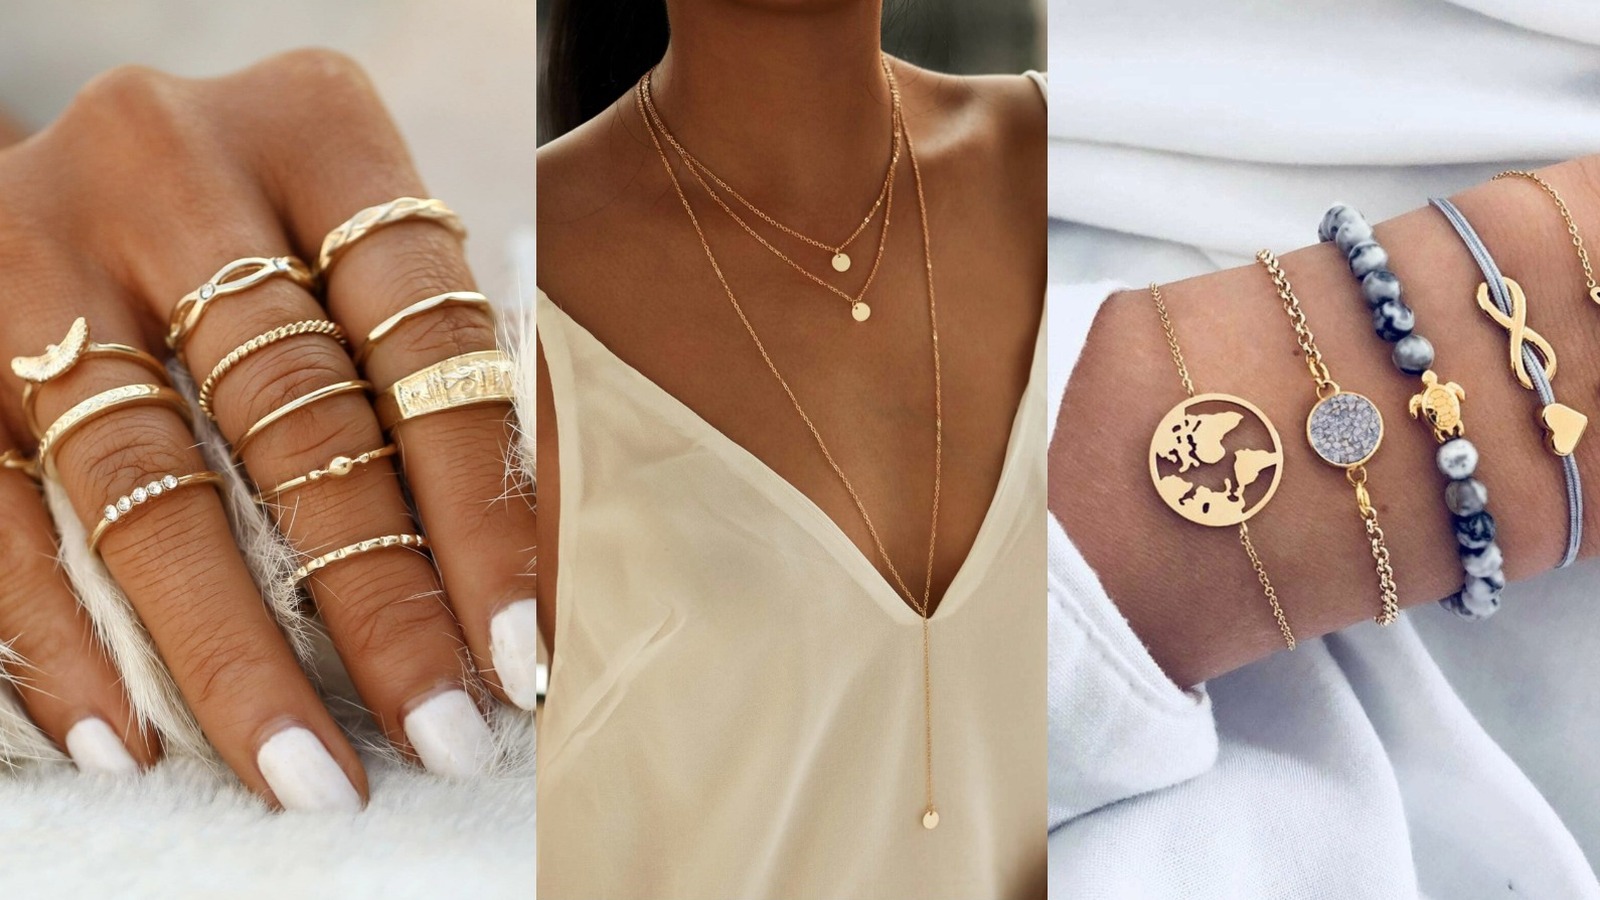 I Found 8 Amazing SHEIN Designer Dupes Jewelry That Look Just Like